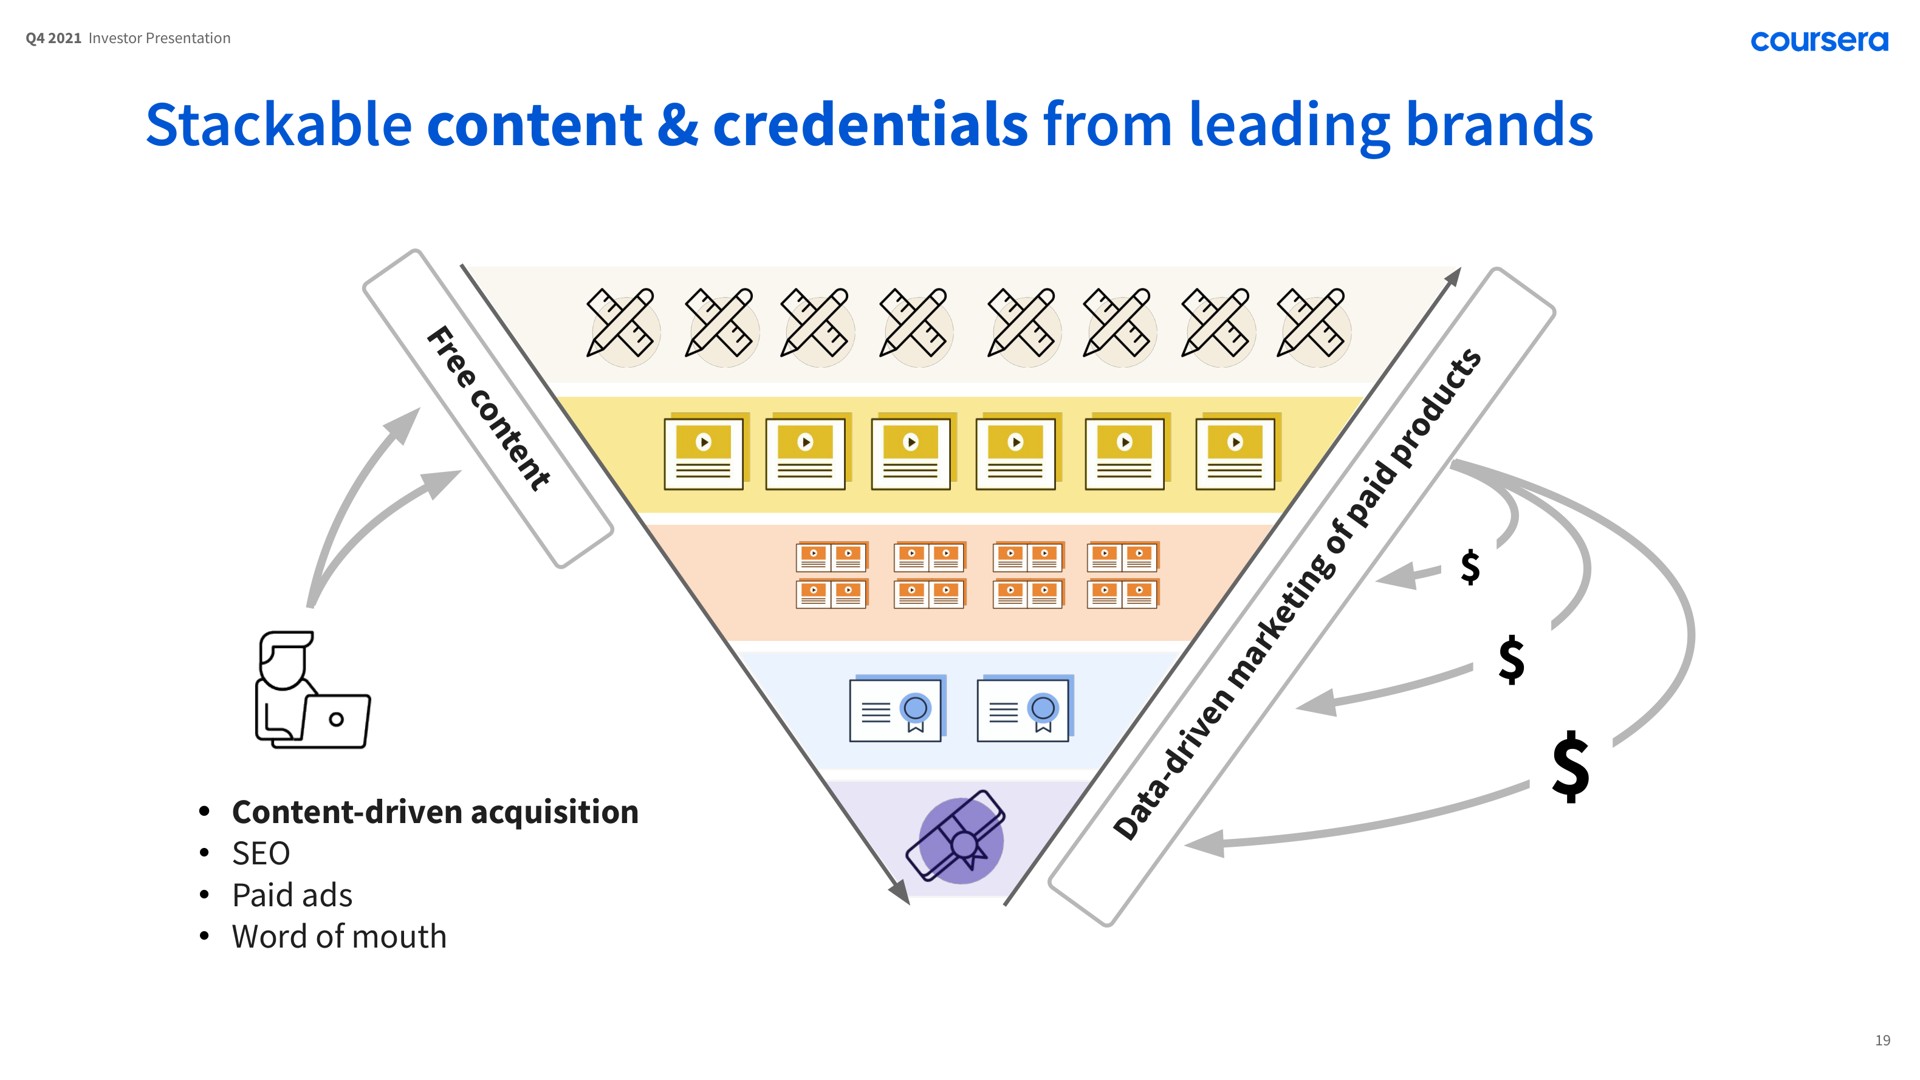 content credentials from leading brands word of mouth paid ads | Coursera